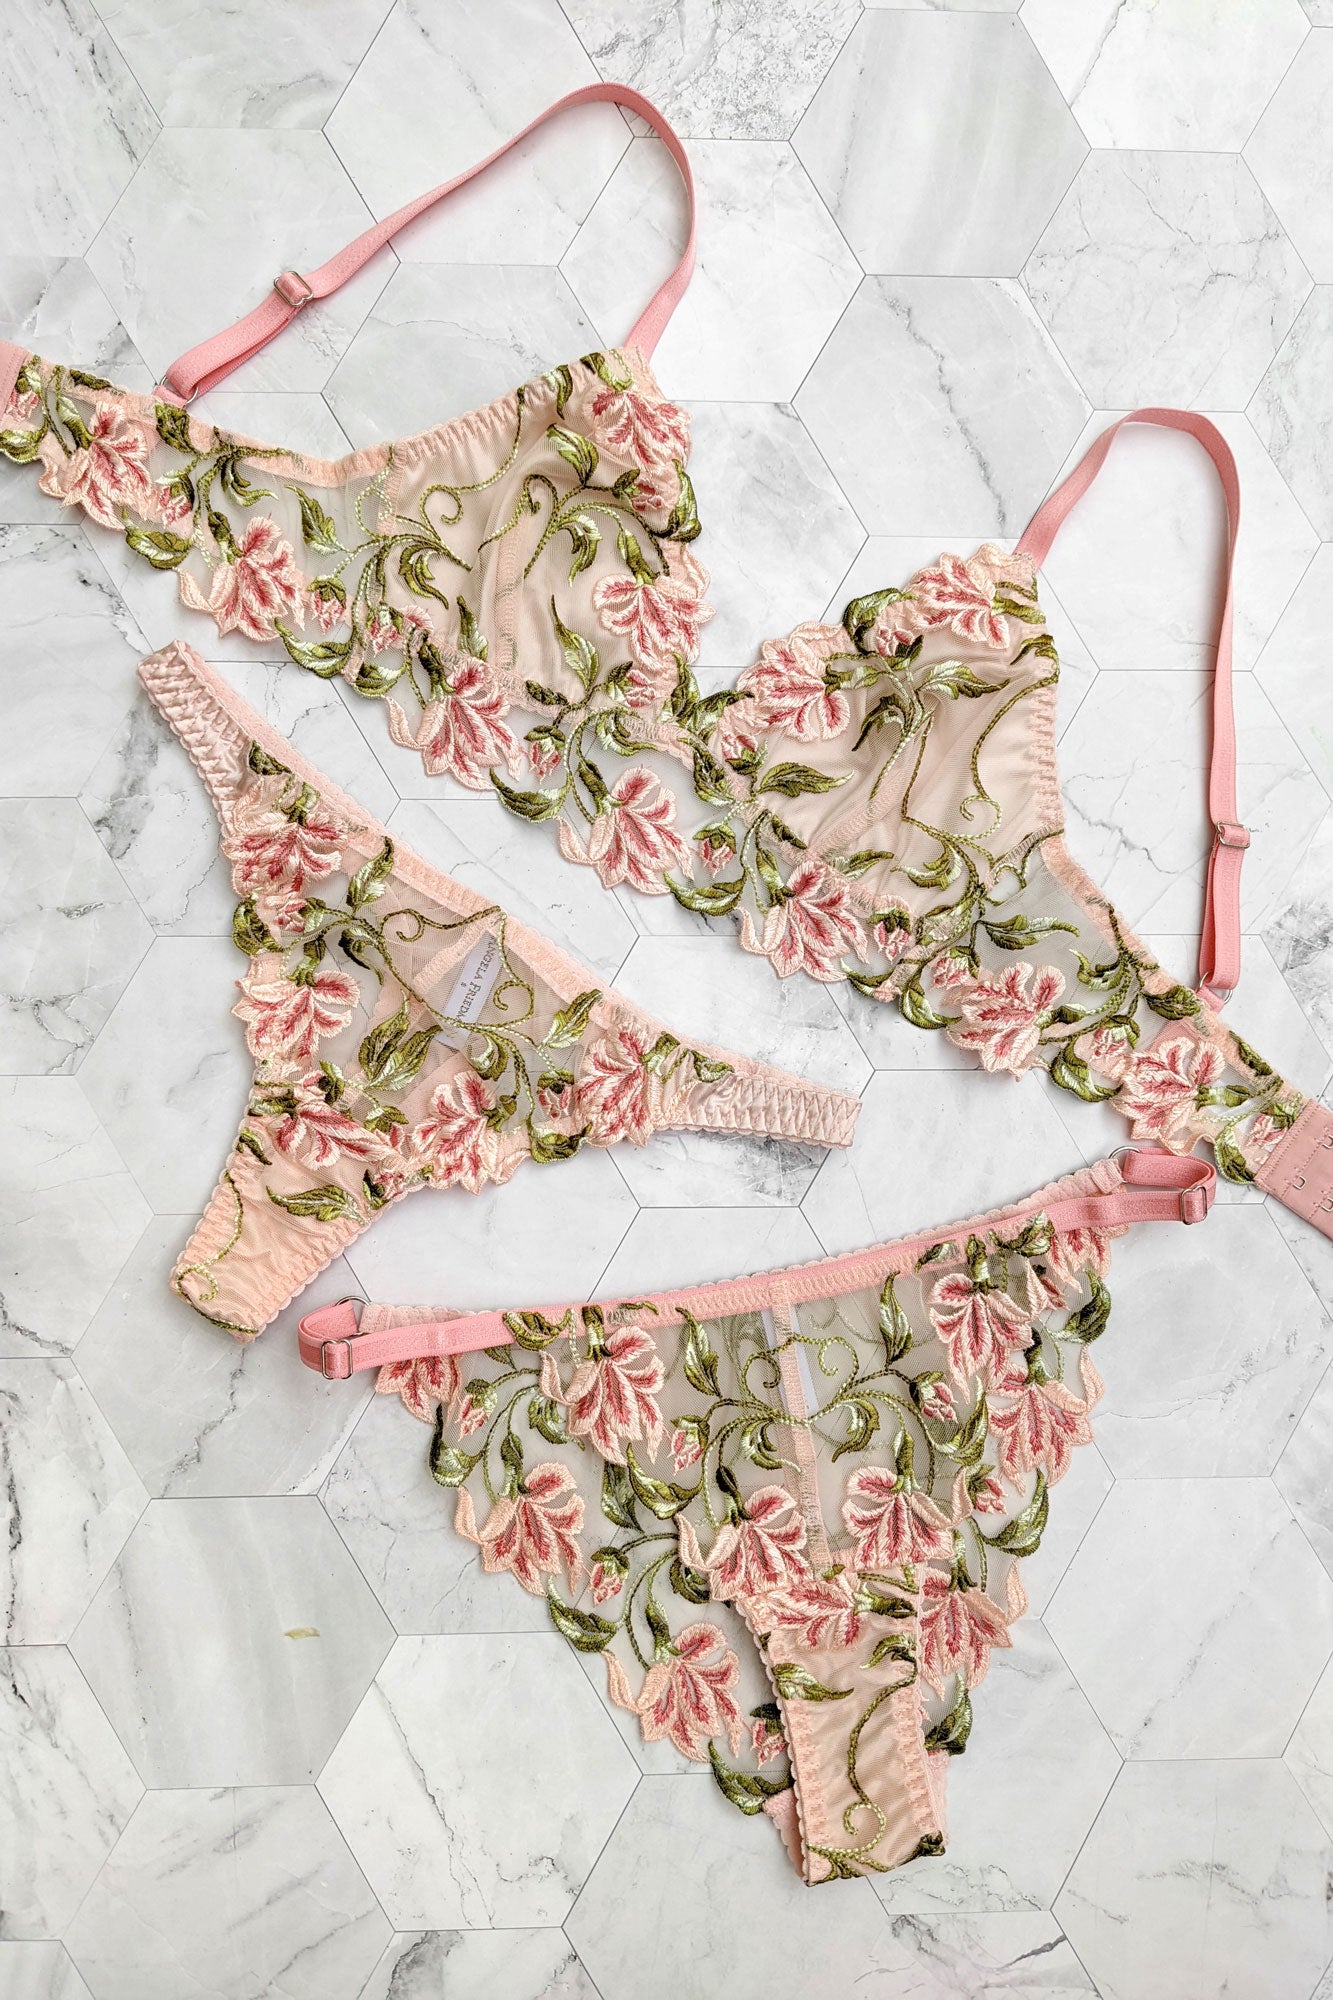 Luxury lingerie set with floral embroidery on the silk bra, thong, and panties